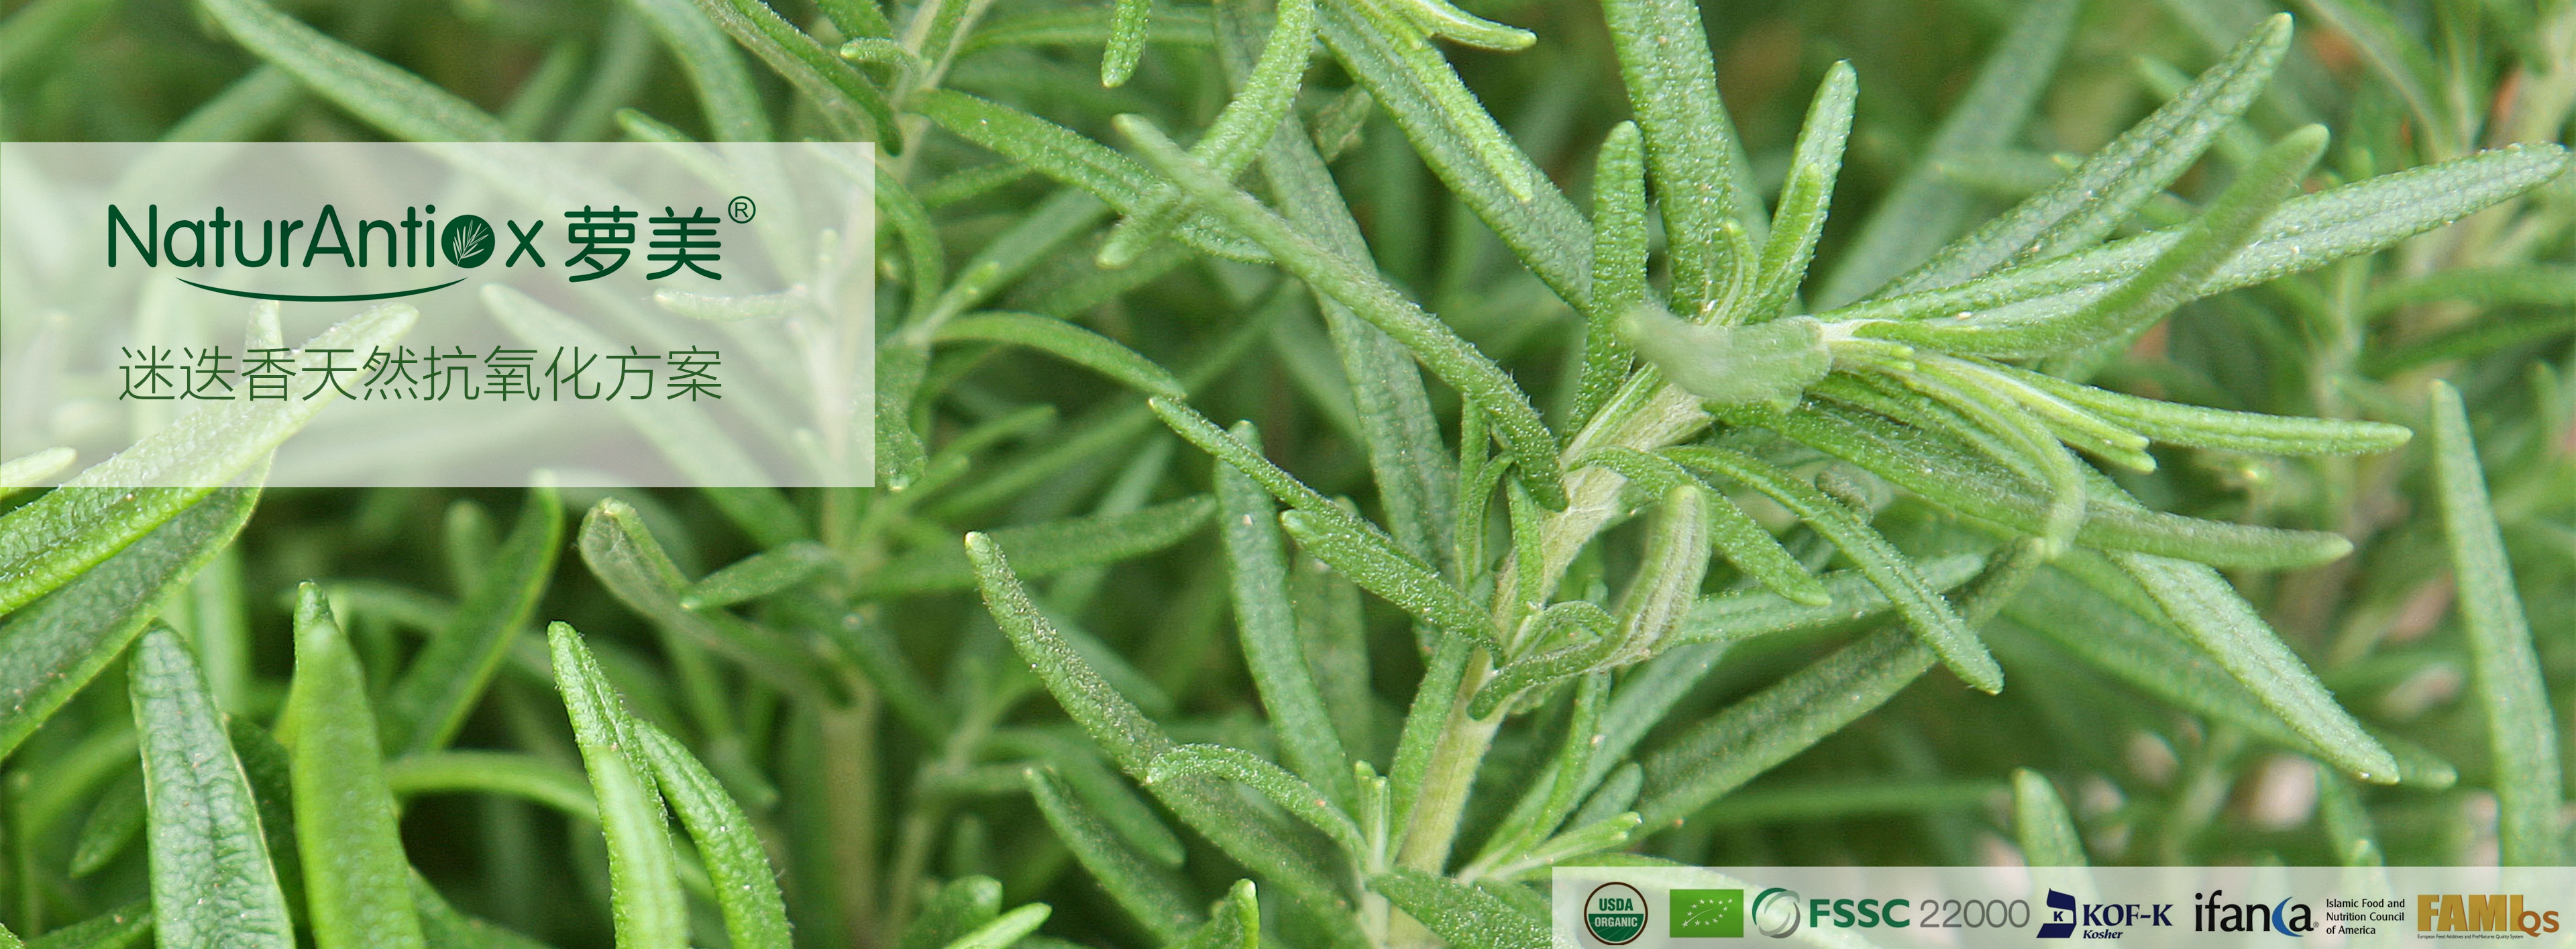 rosemary extracts-banner-CN